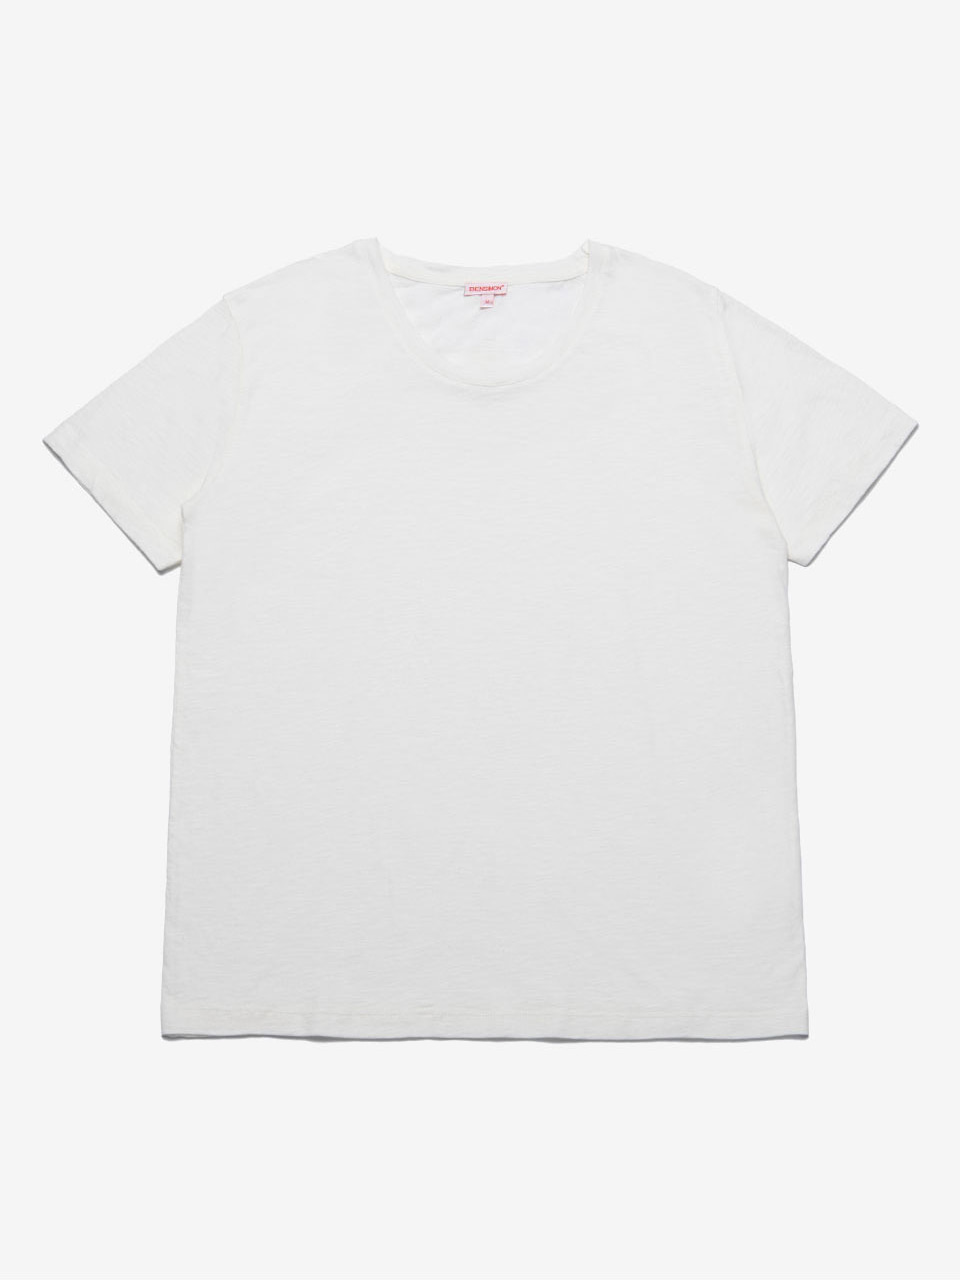 [PARIS COLLECTION] TEE SHIRT PERNILLE - WHITE